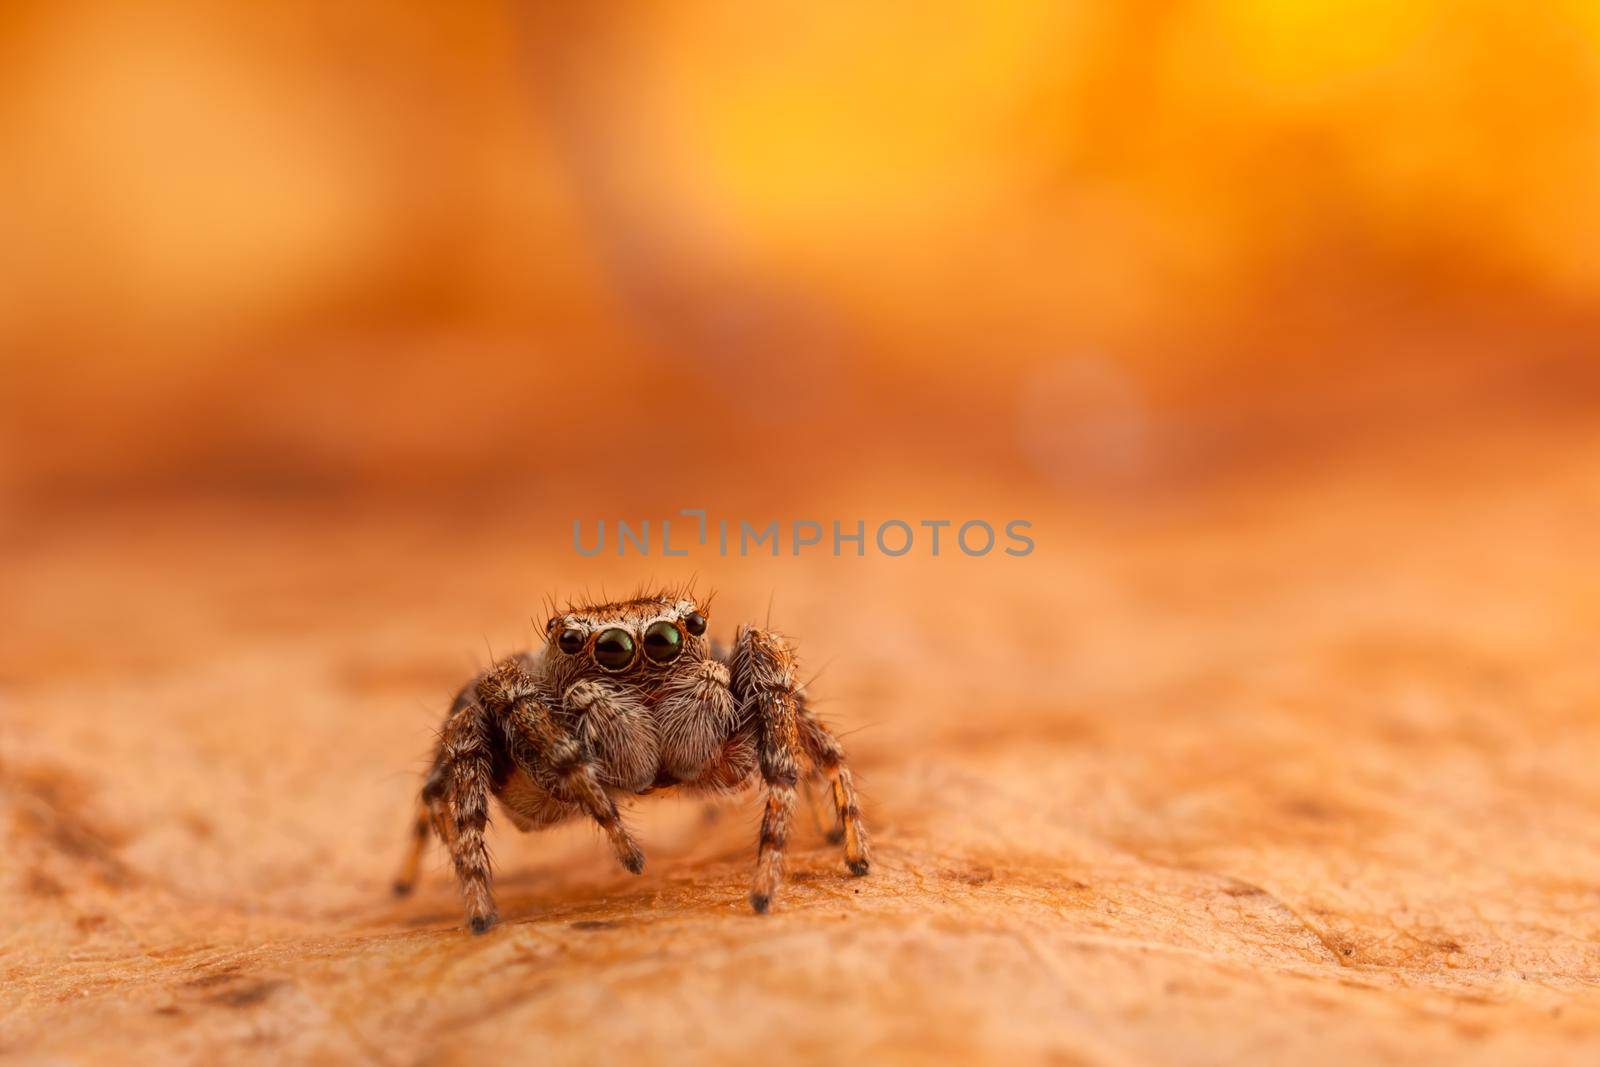 Jumping spider on the orange and shining leaf